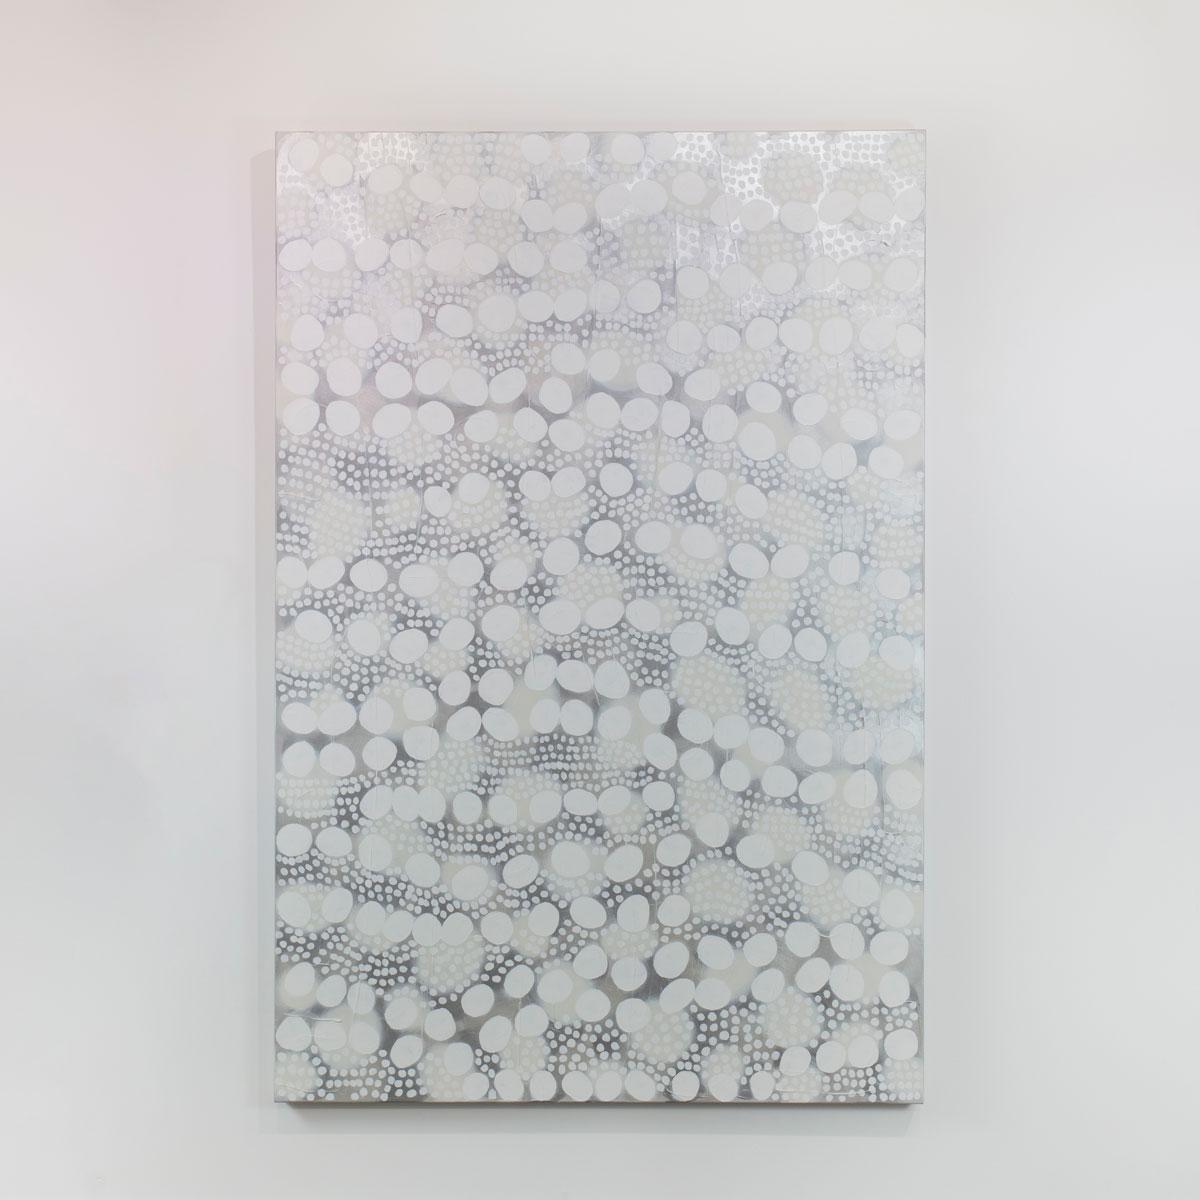 This large abstract statement painting by Sofie Swann features a white and light grey palette, with varying sizes of imperfect white circular shapes arranged with subtle metallic silver accents throughout the canvas. This painting is made on gallery